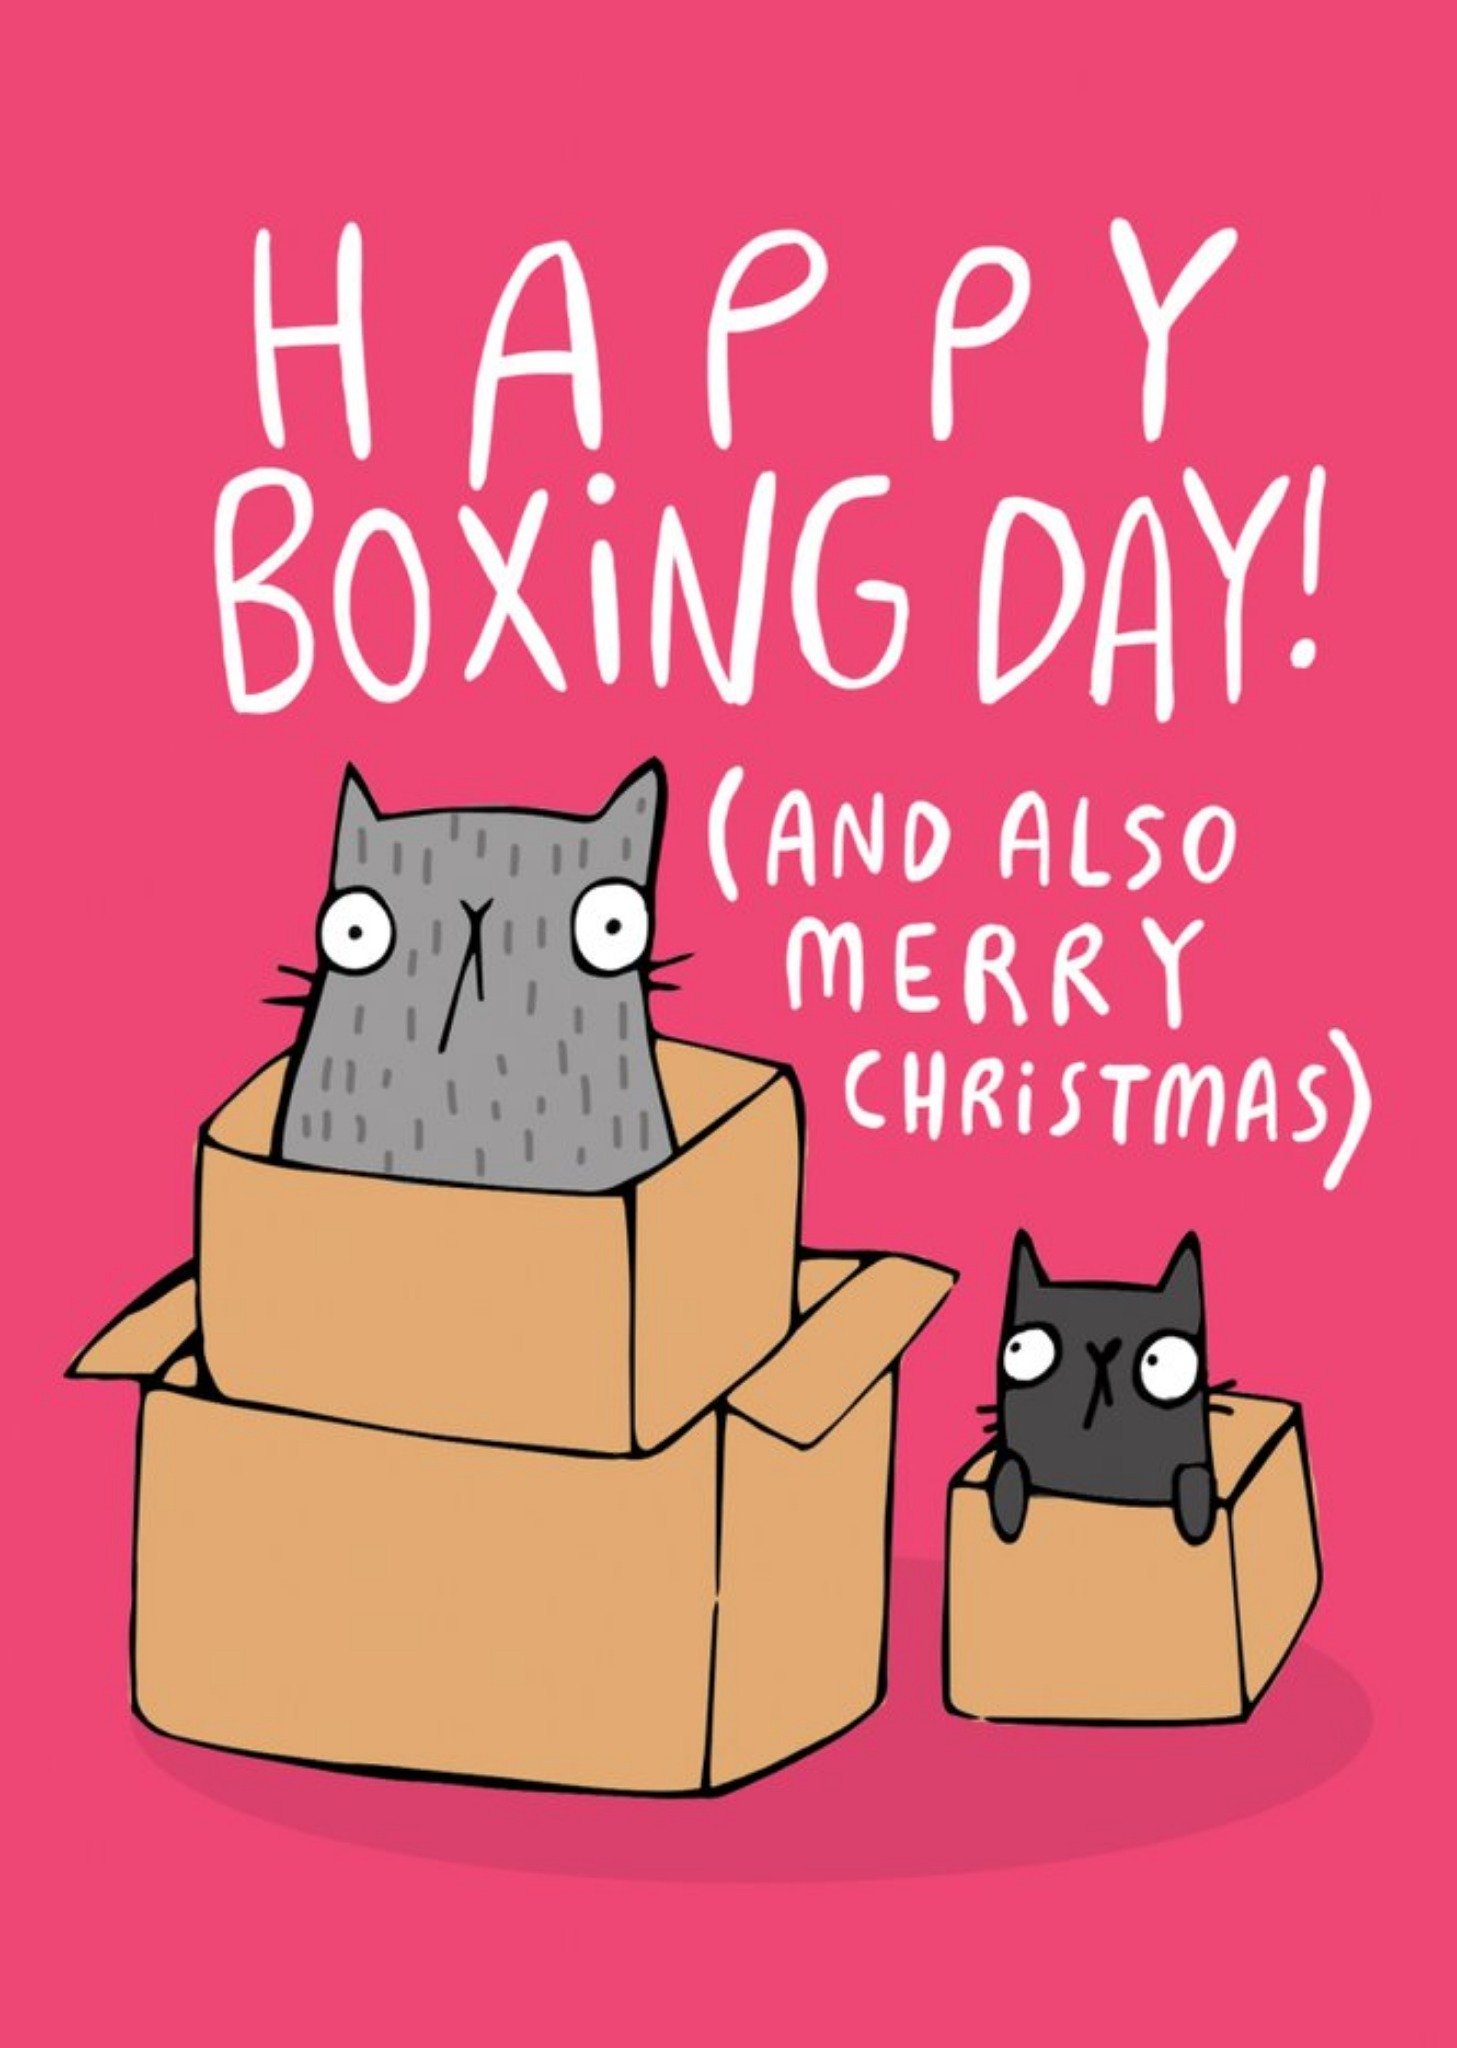 Moonpig Cute Cartoon Pun Happy Boxing Day And Also Merry Christmas Card Ecard